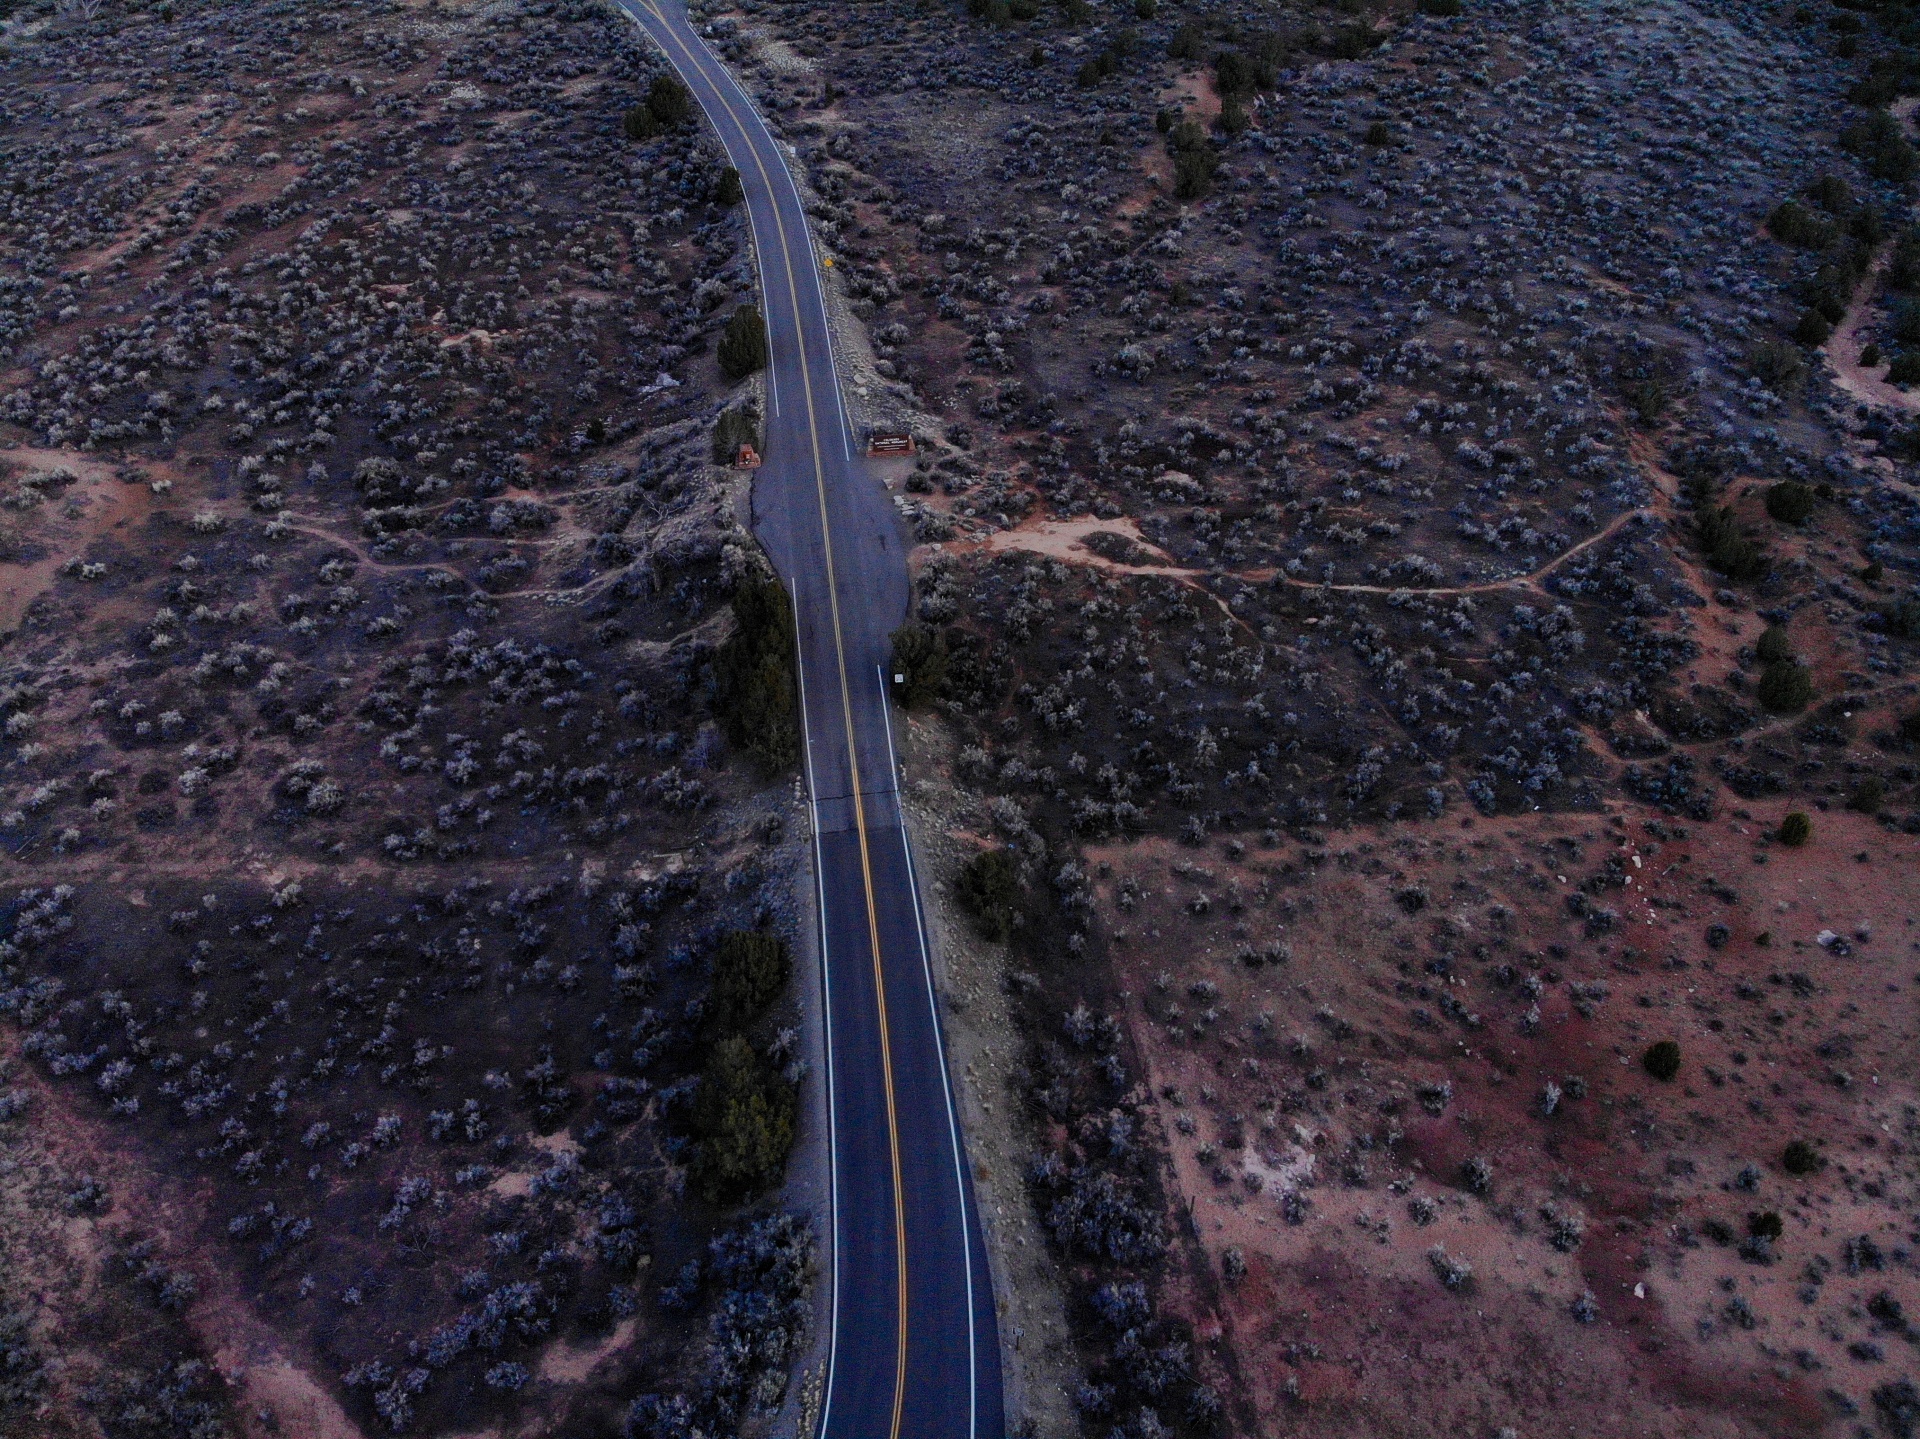 Just a lonely road running through a rural part of Western Colorado. Photographed by a Mavic Air drone.